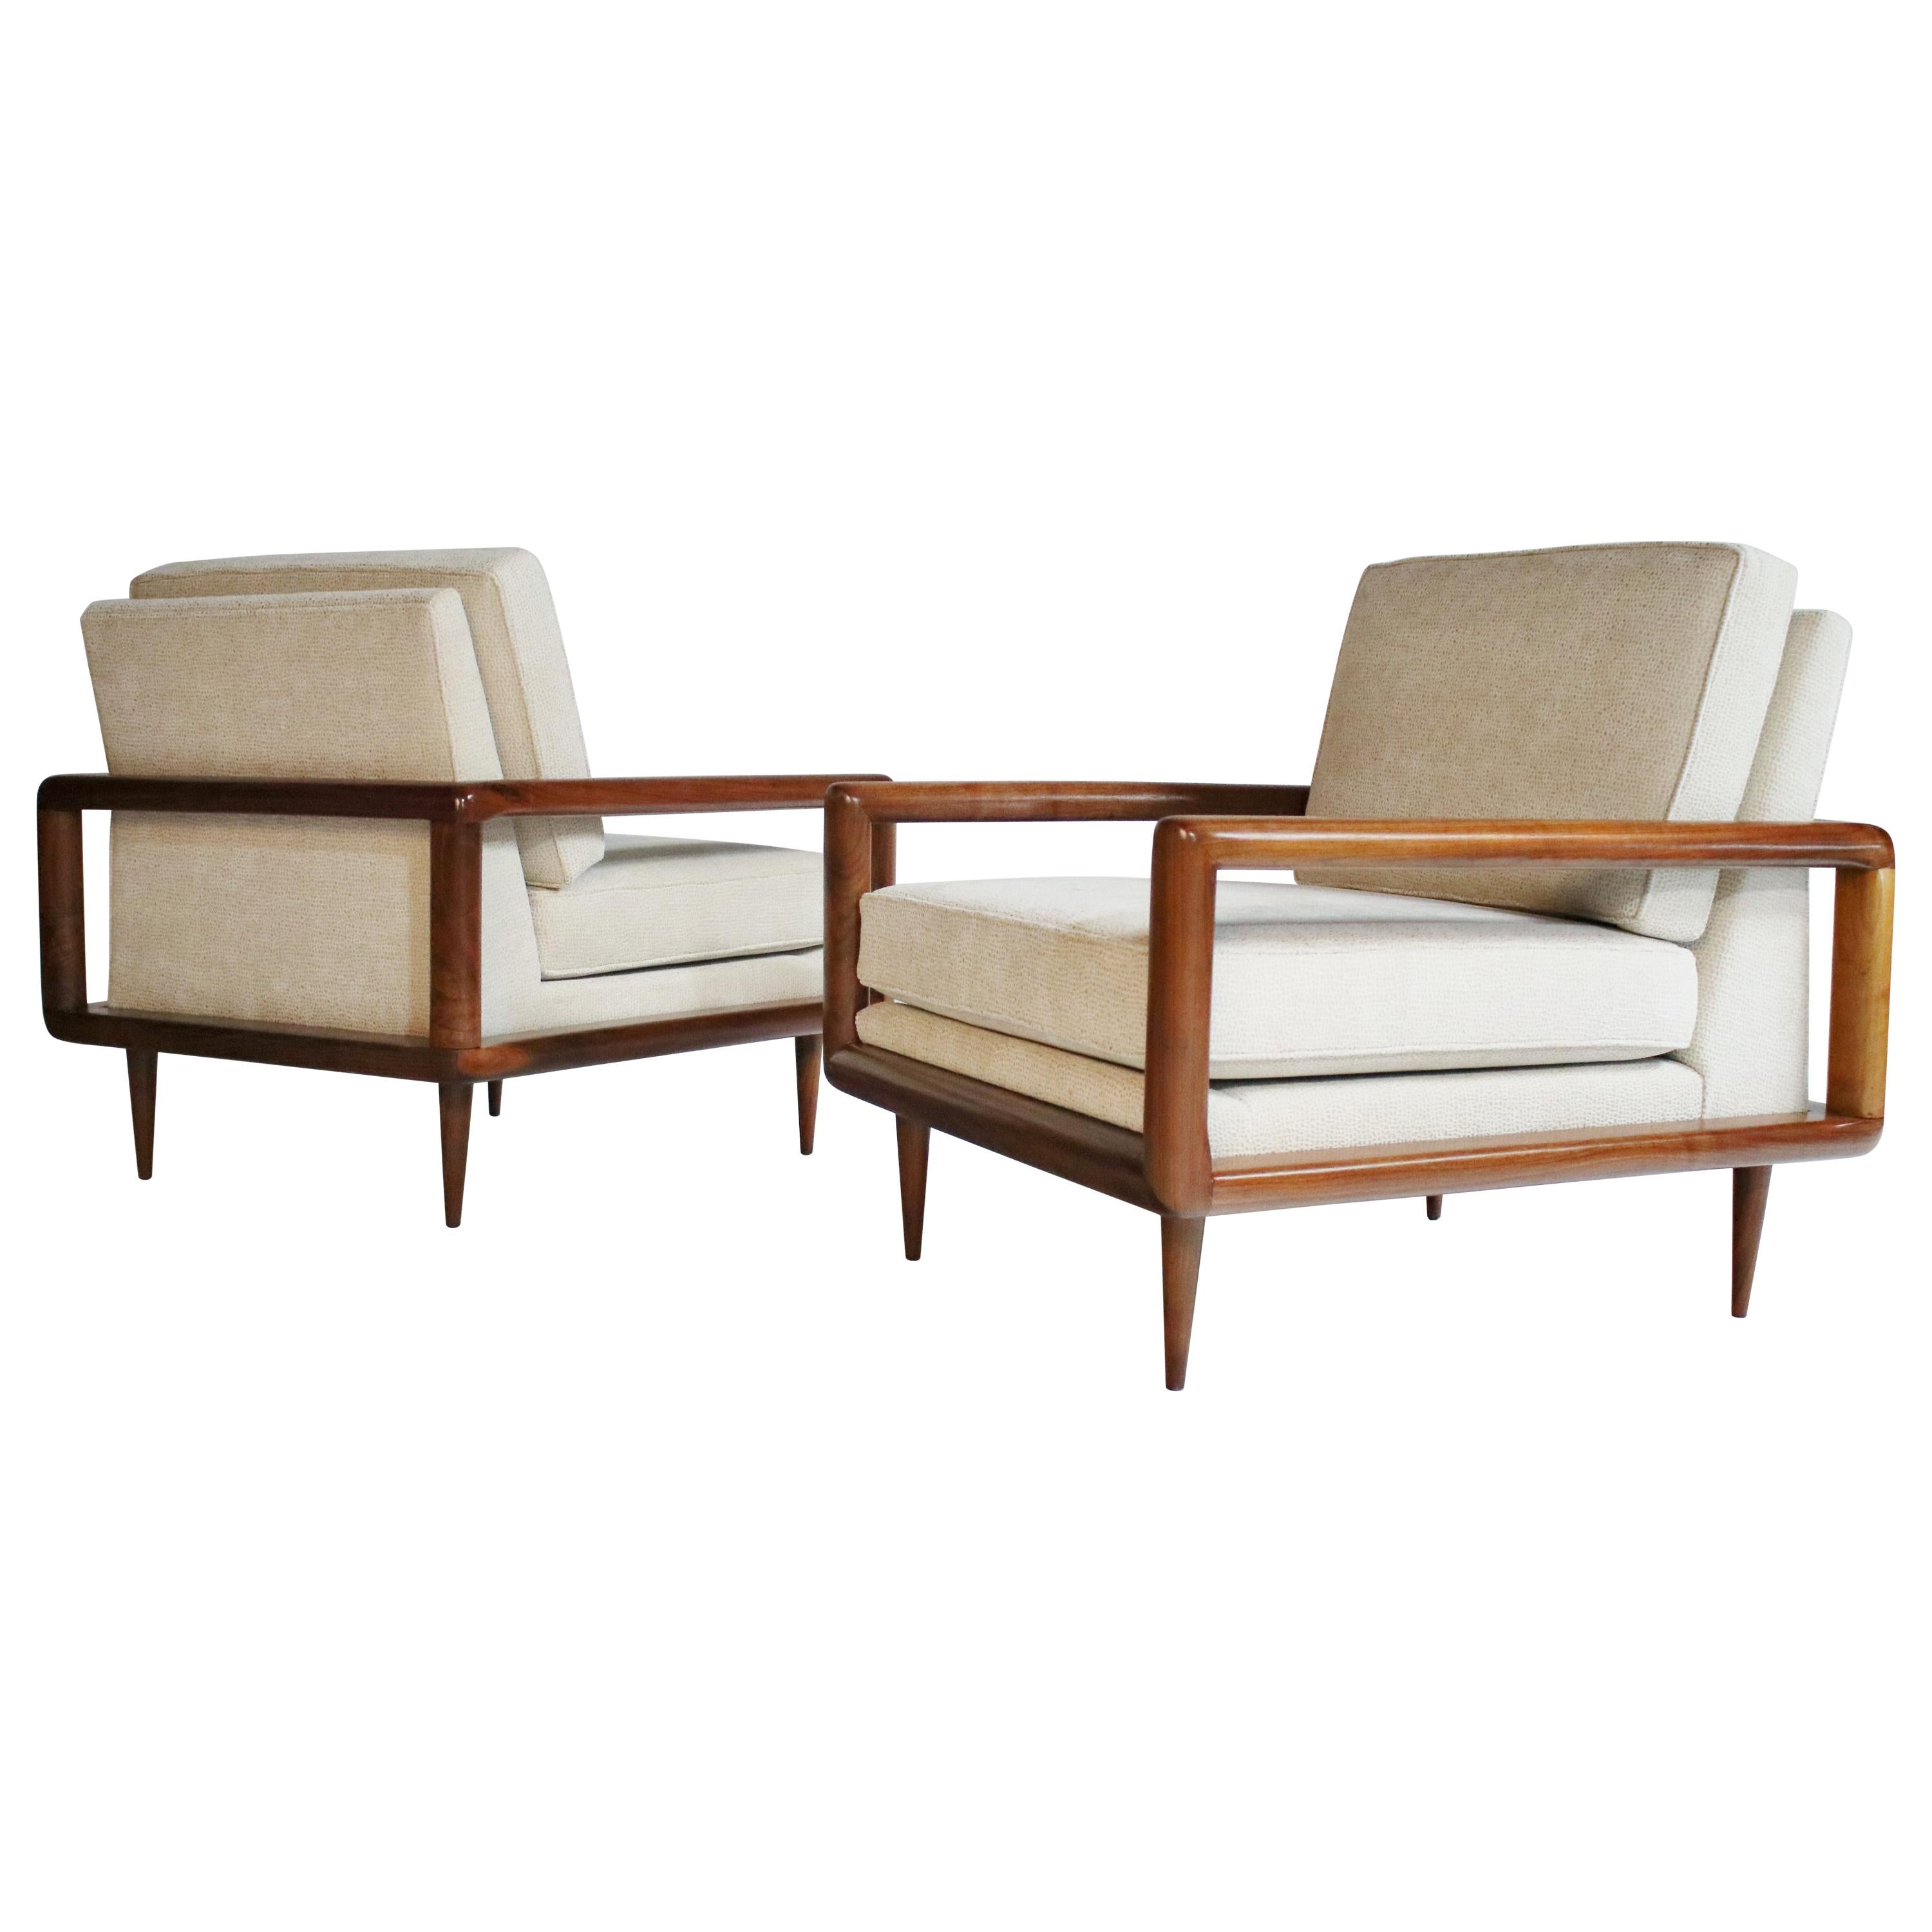 Pair of Midcentury Open Arm Cubed Walnut Lounge Chairs